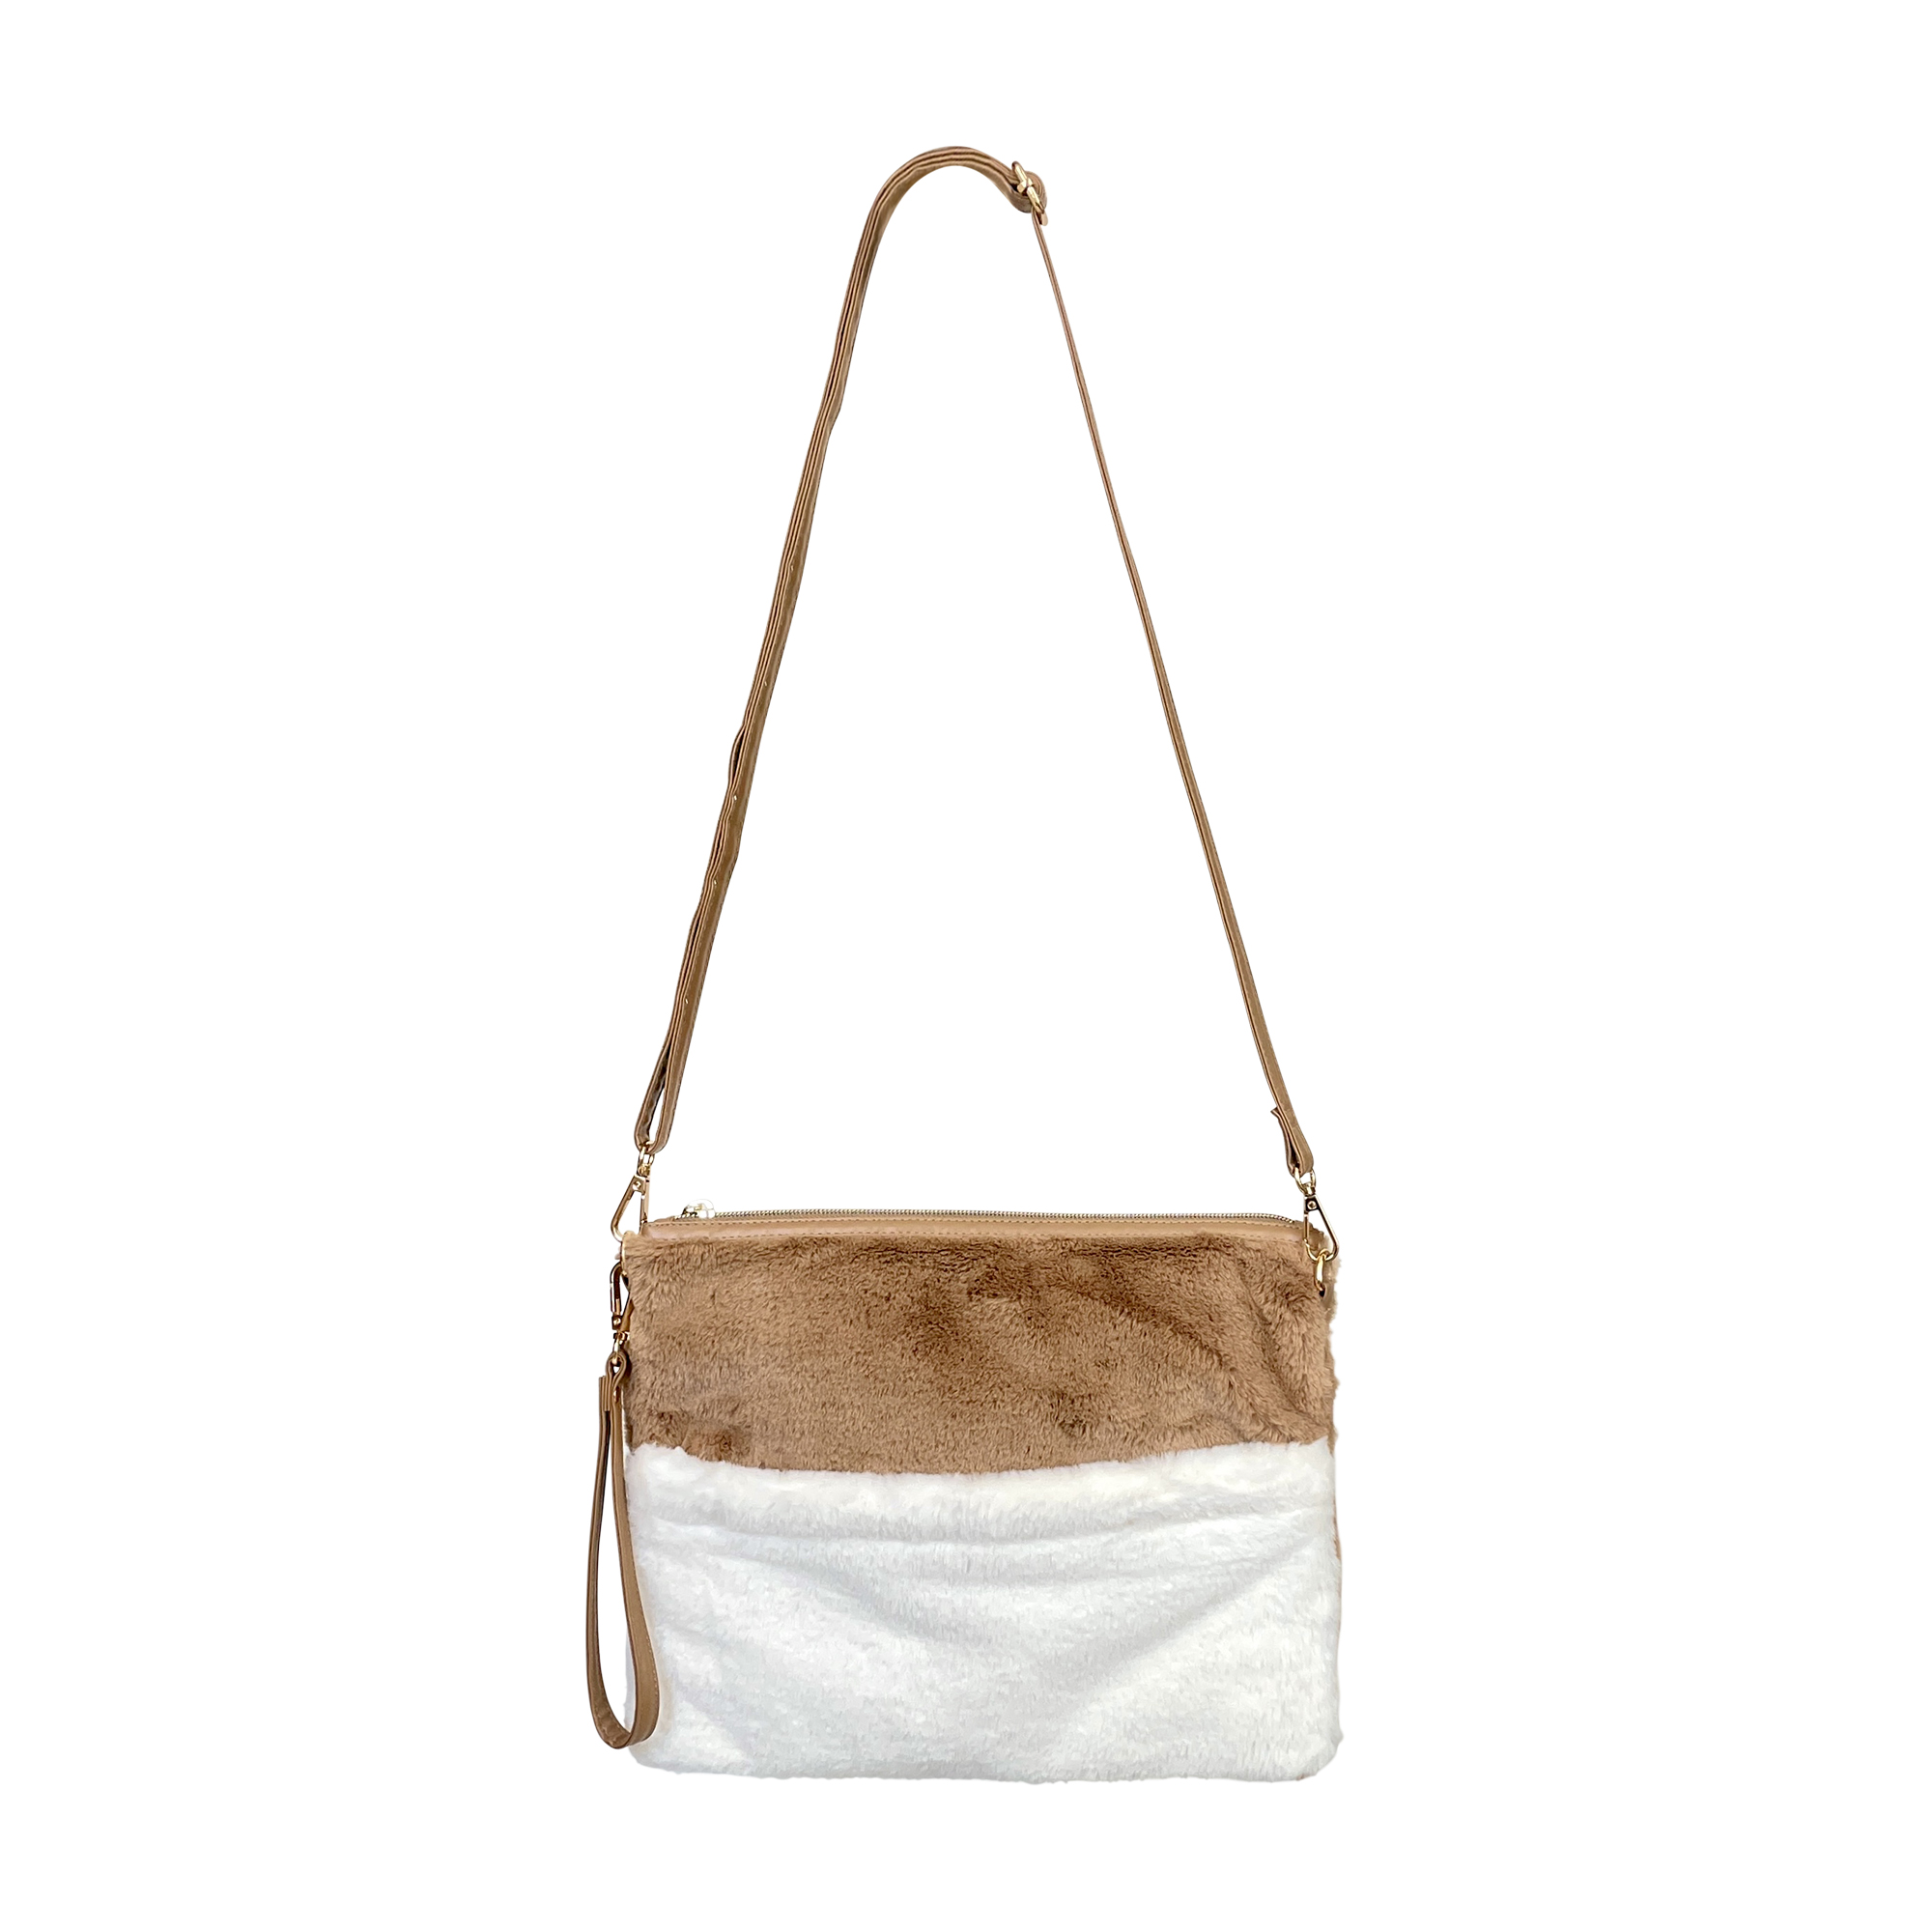 Faux Leather Crossbody Bag Purse (Camel Brown)